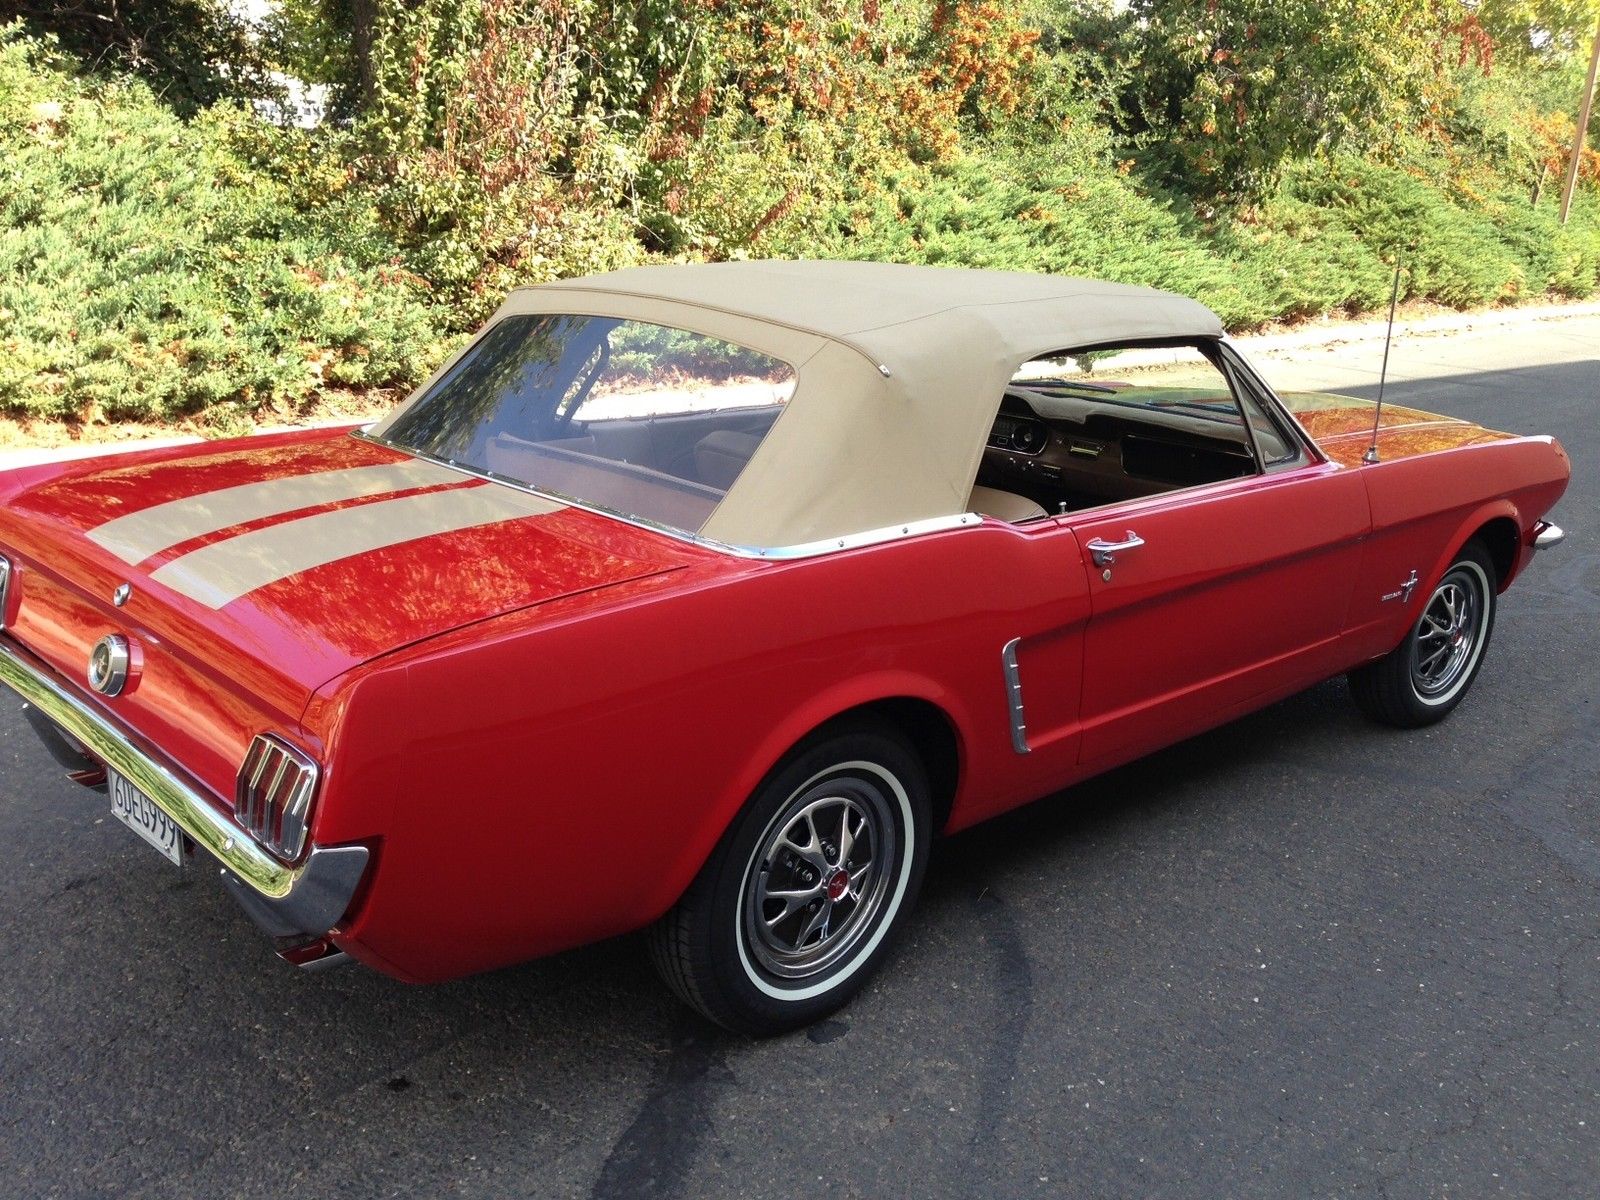 1964 1/2 Ford Mustang Convertible, Matching Numbers, Restored